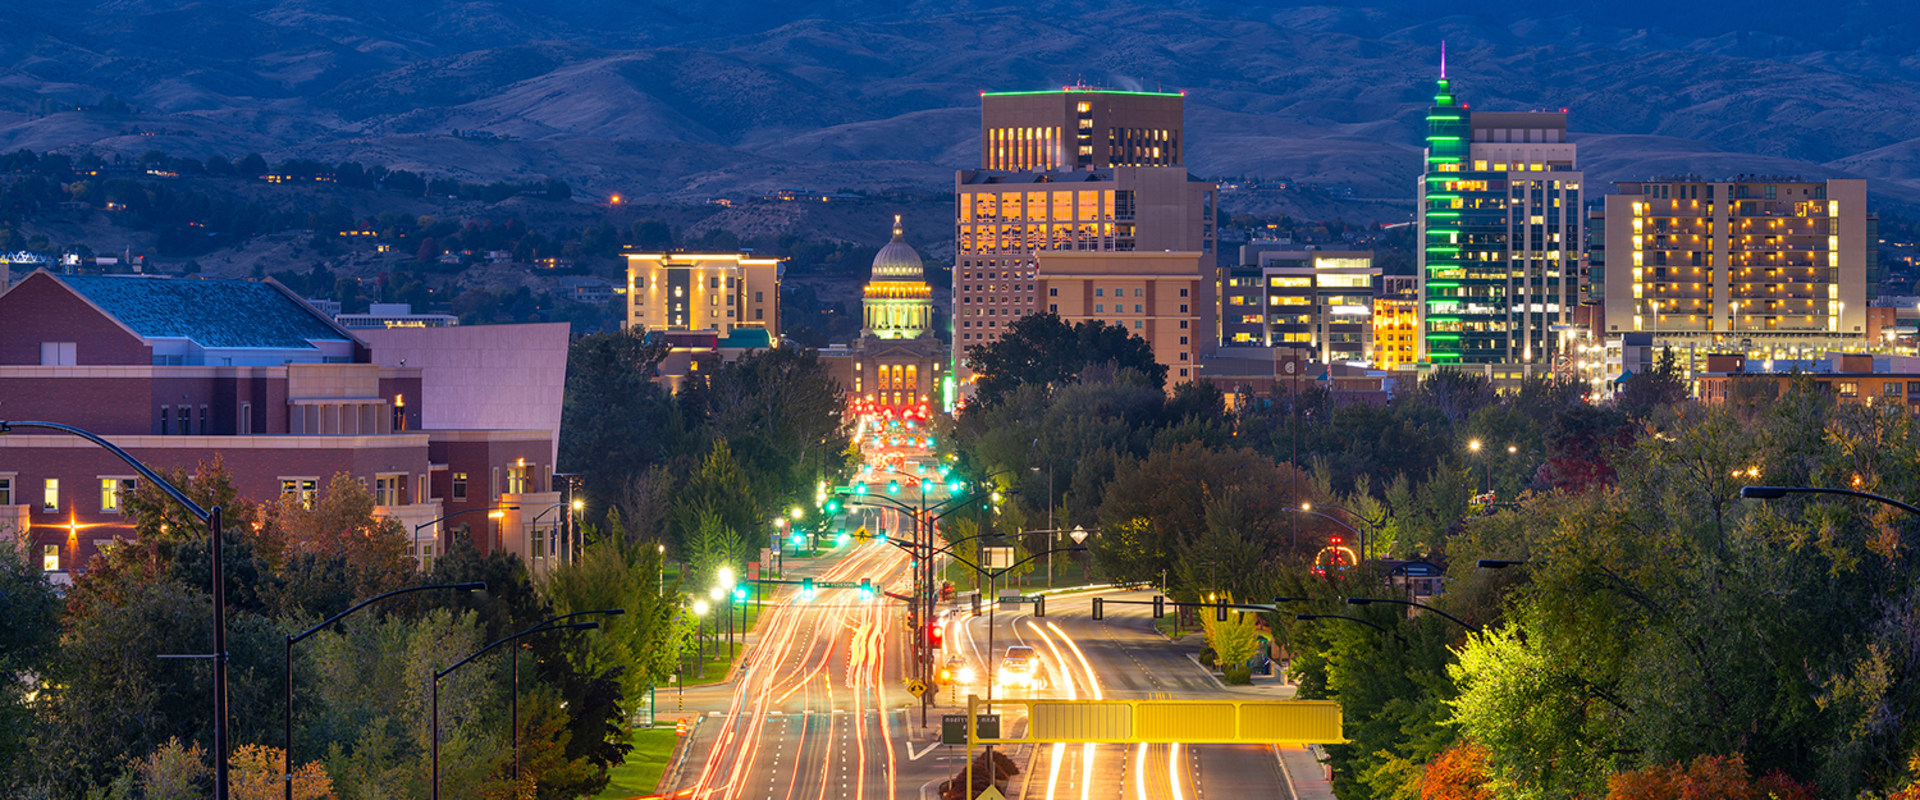 Is boise idaho a good place to live?